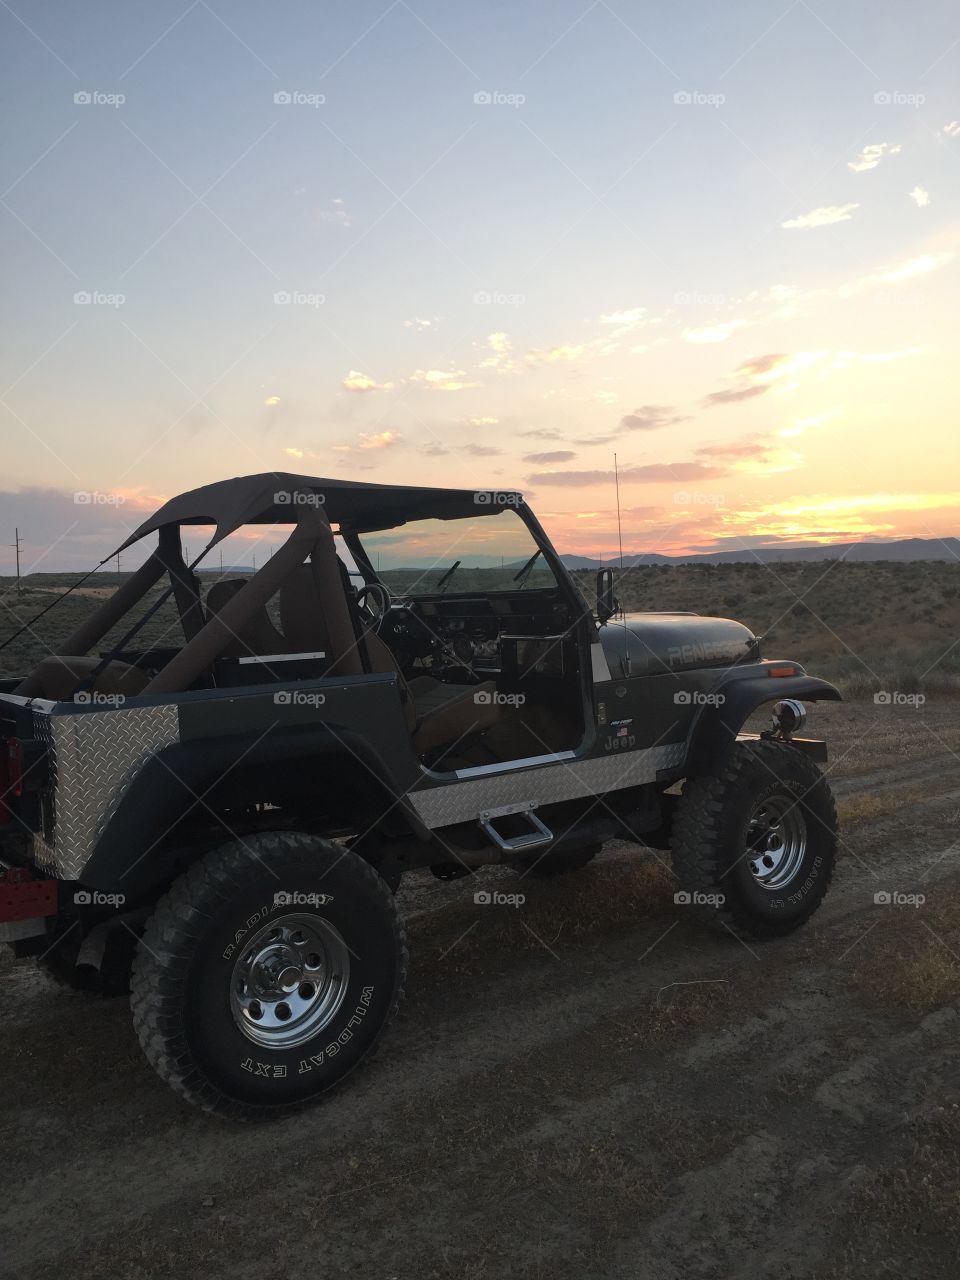 Jeeps and Sunsets 